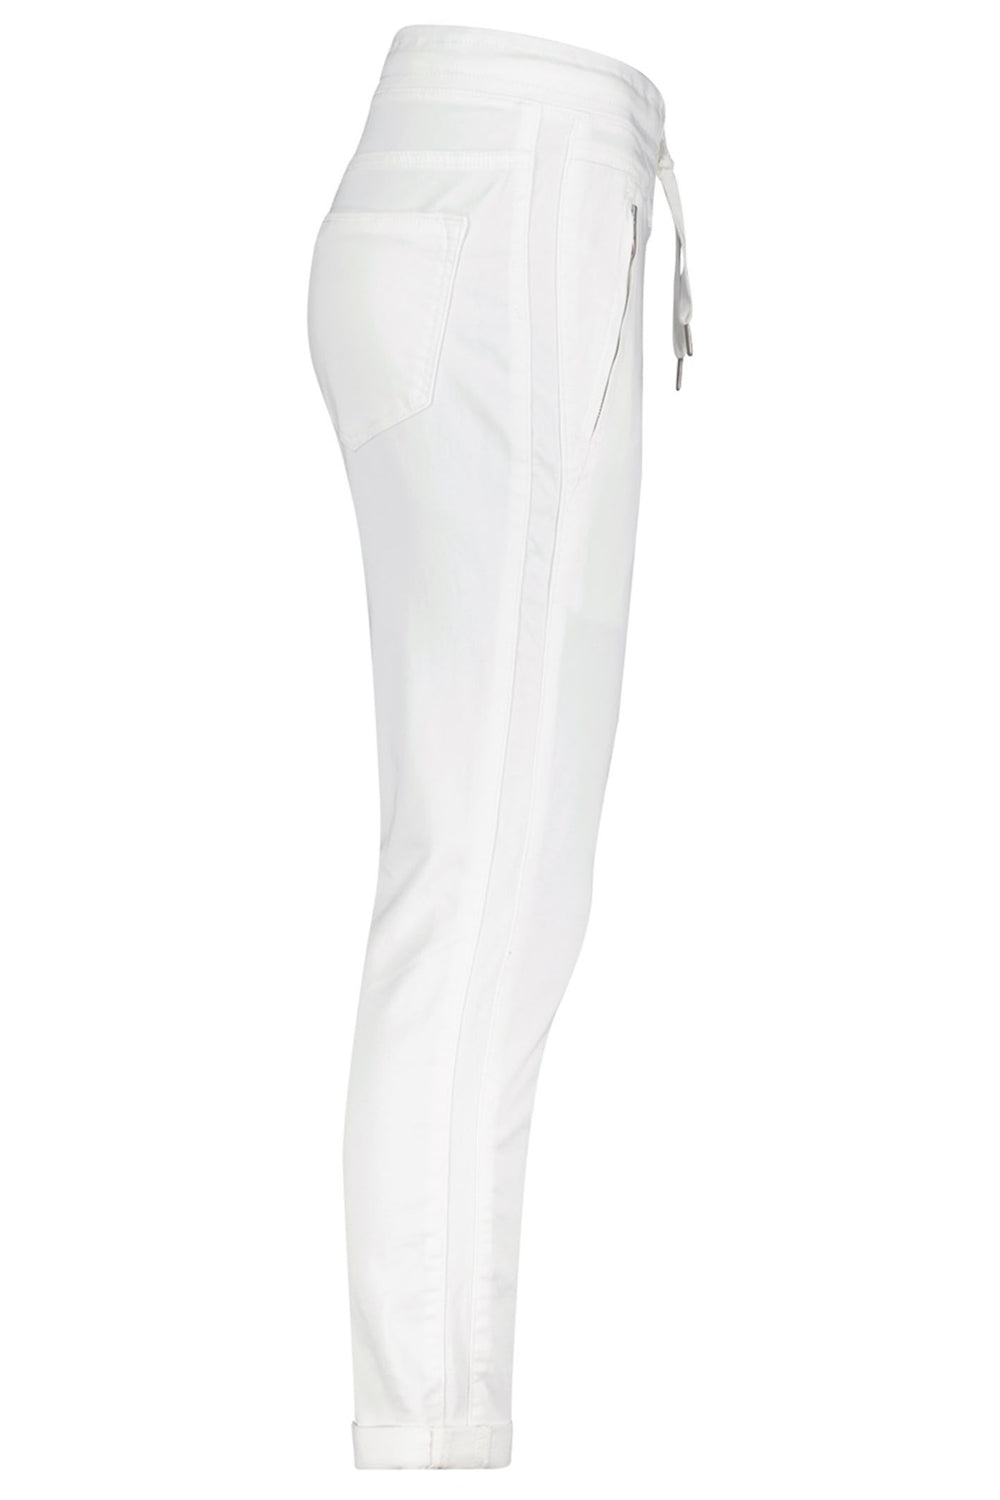 Red Button SRB2957 Tessy White Cropped Jogger Trousers - Dotique